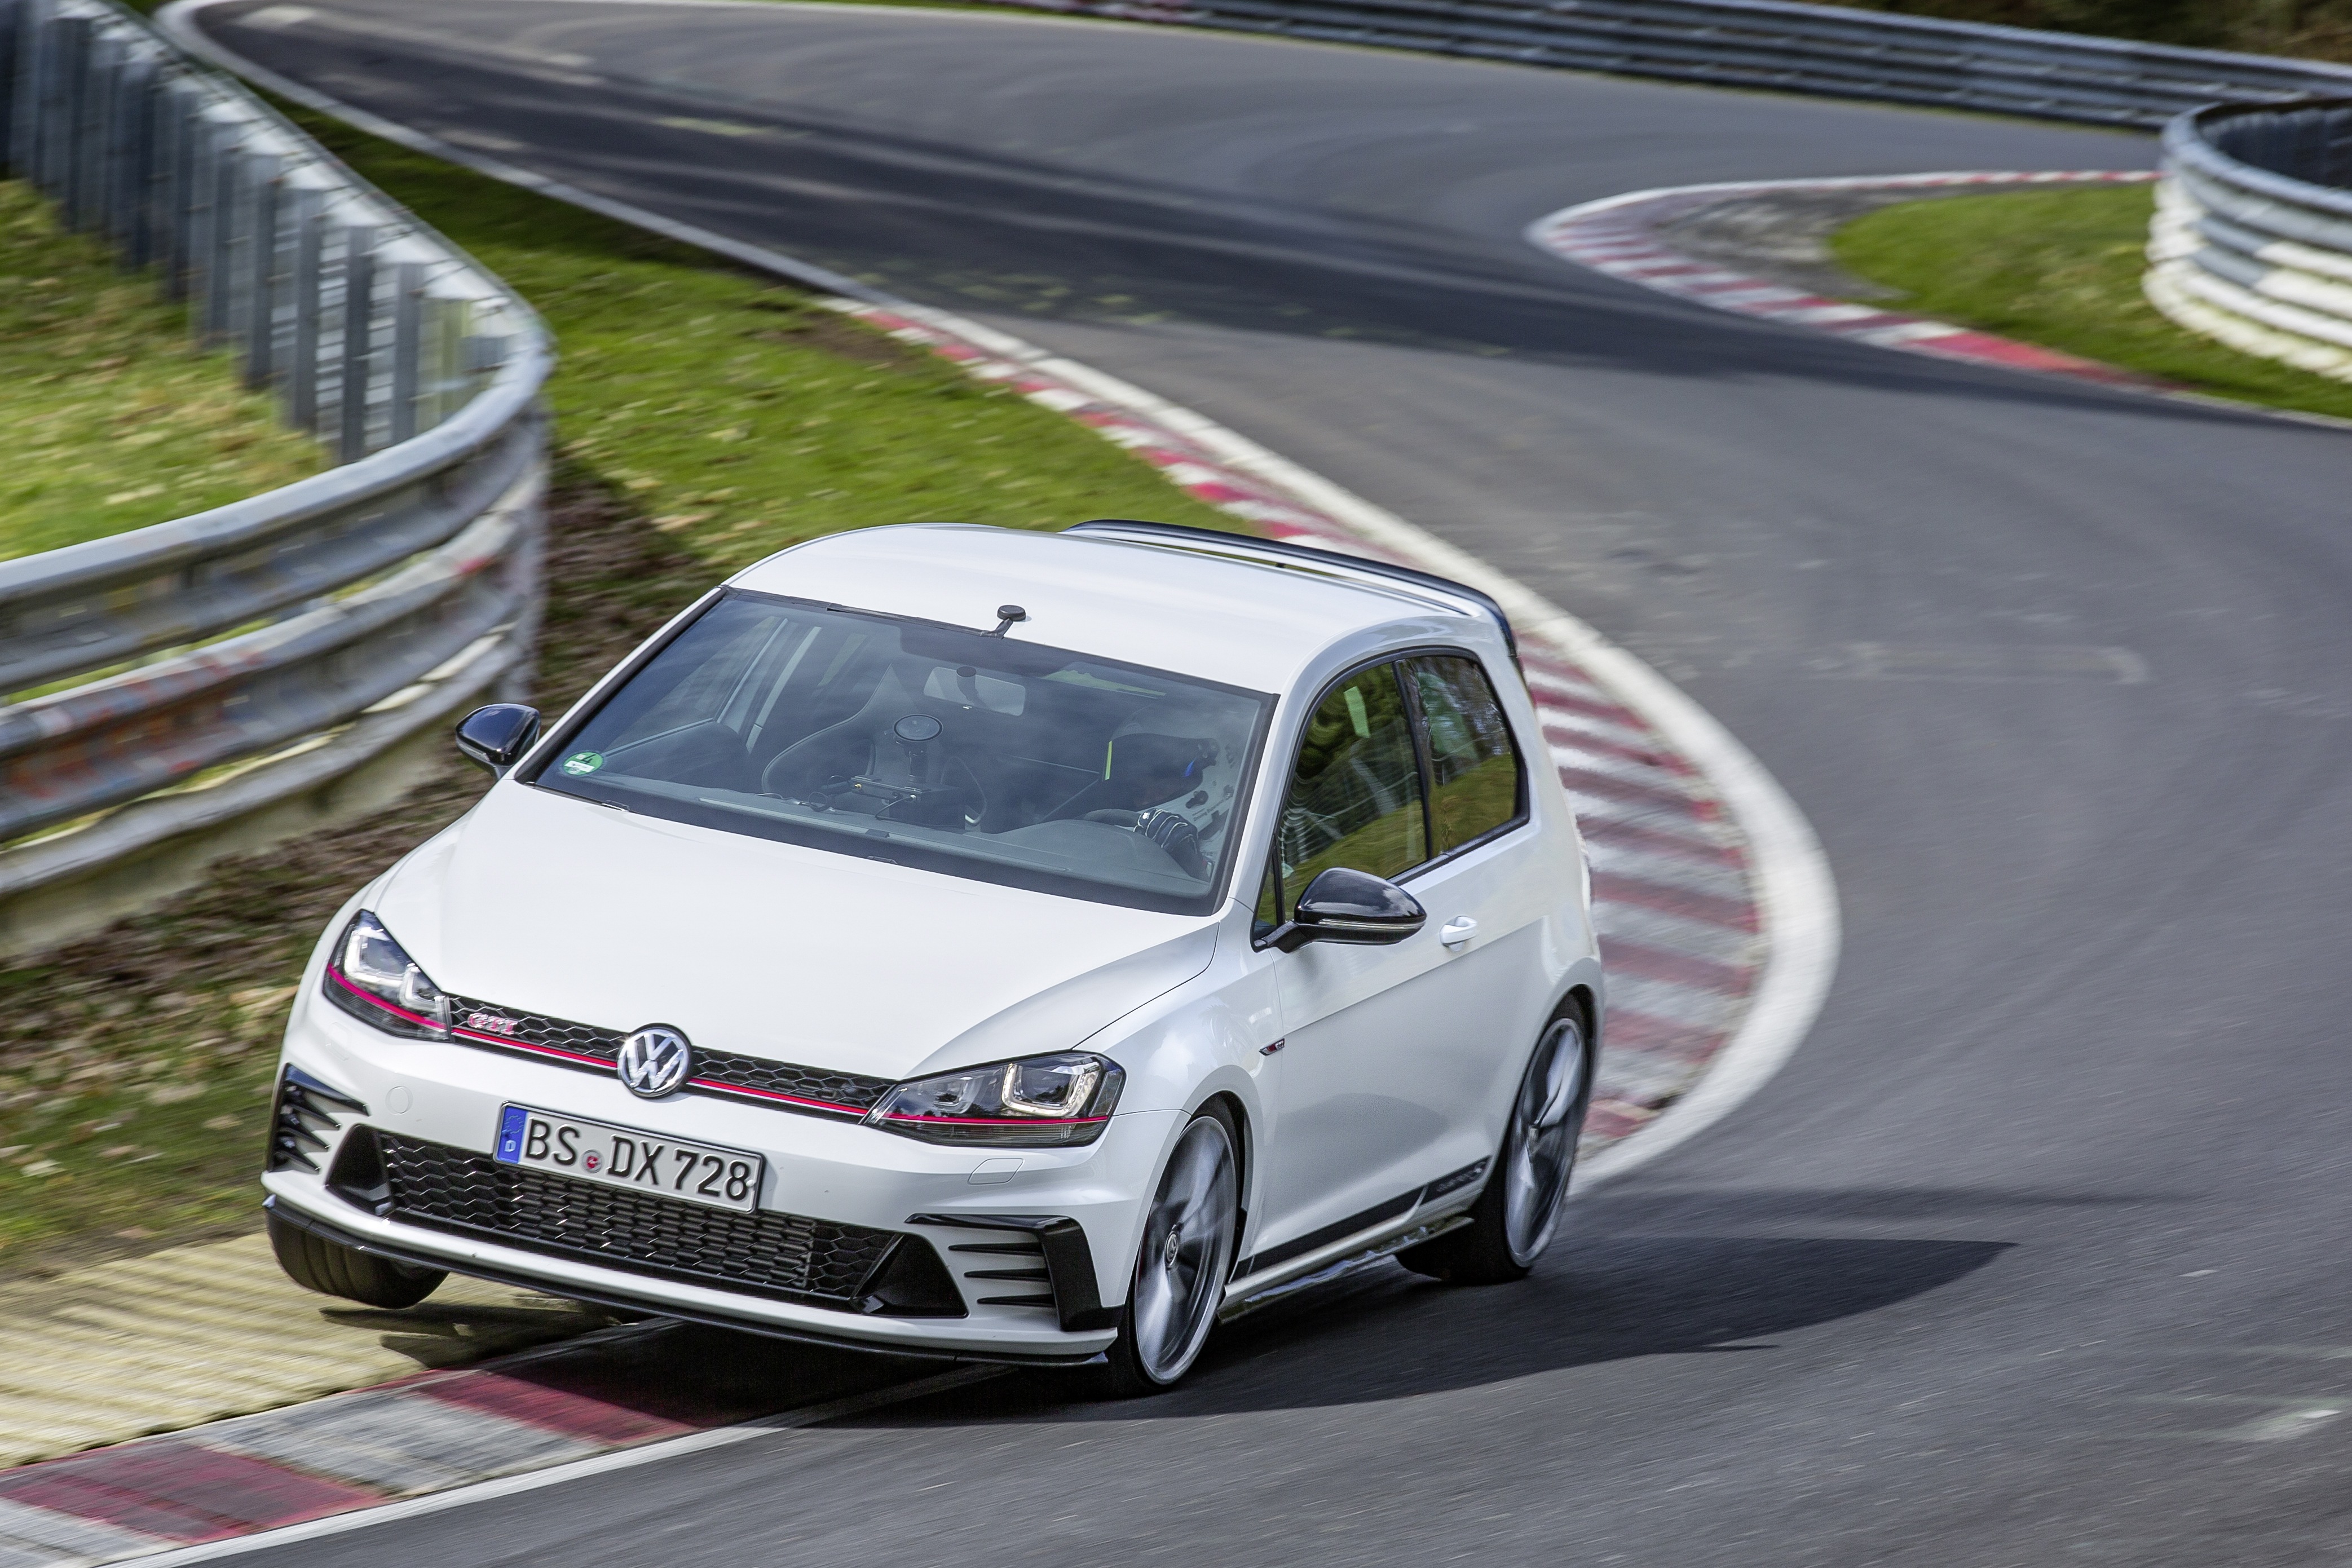 Volkswagen Golf Clubsport S - prices, specs and 0-60 time evo